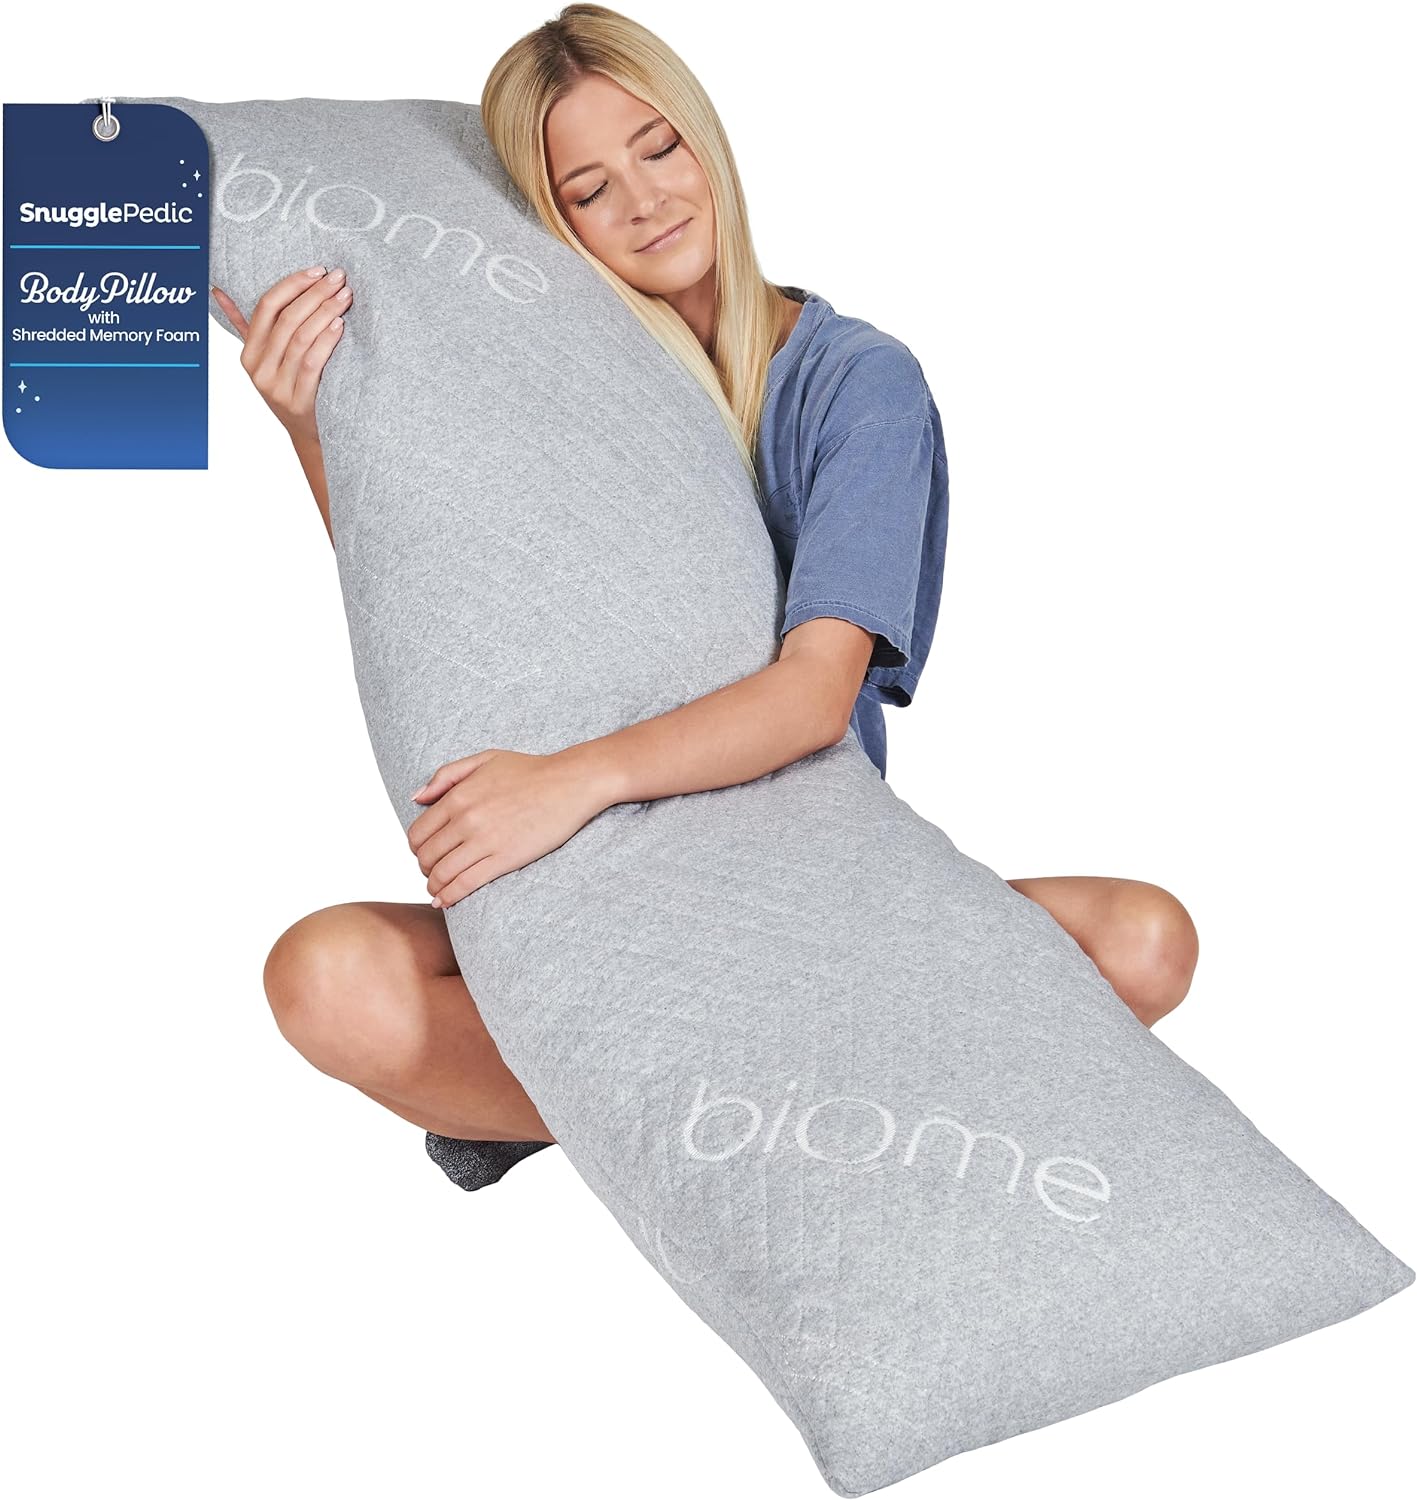 If you are looking for One Incredible Body pillow to blow your socks off, look no further..this is the one!! I can not say enough great things about this pillow. I've included pictures for your viewing pleasure..and hopefully my video in an update, as Amazon does not allow for video uploads from my phone. So let me start:1) Packaging for this product was substantial, secure, compact and clean. Which is important to me, so as it does not appear as though it was dragged through a warehouse.2) When